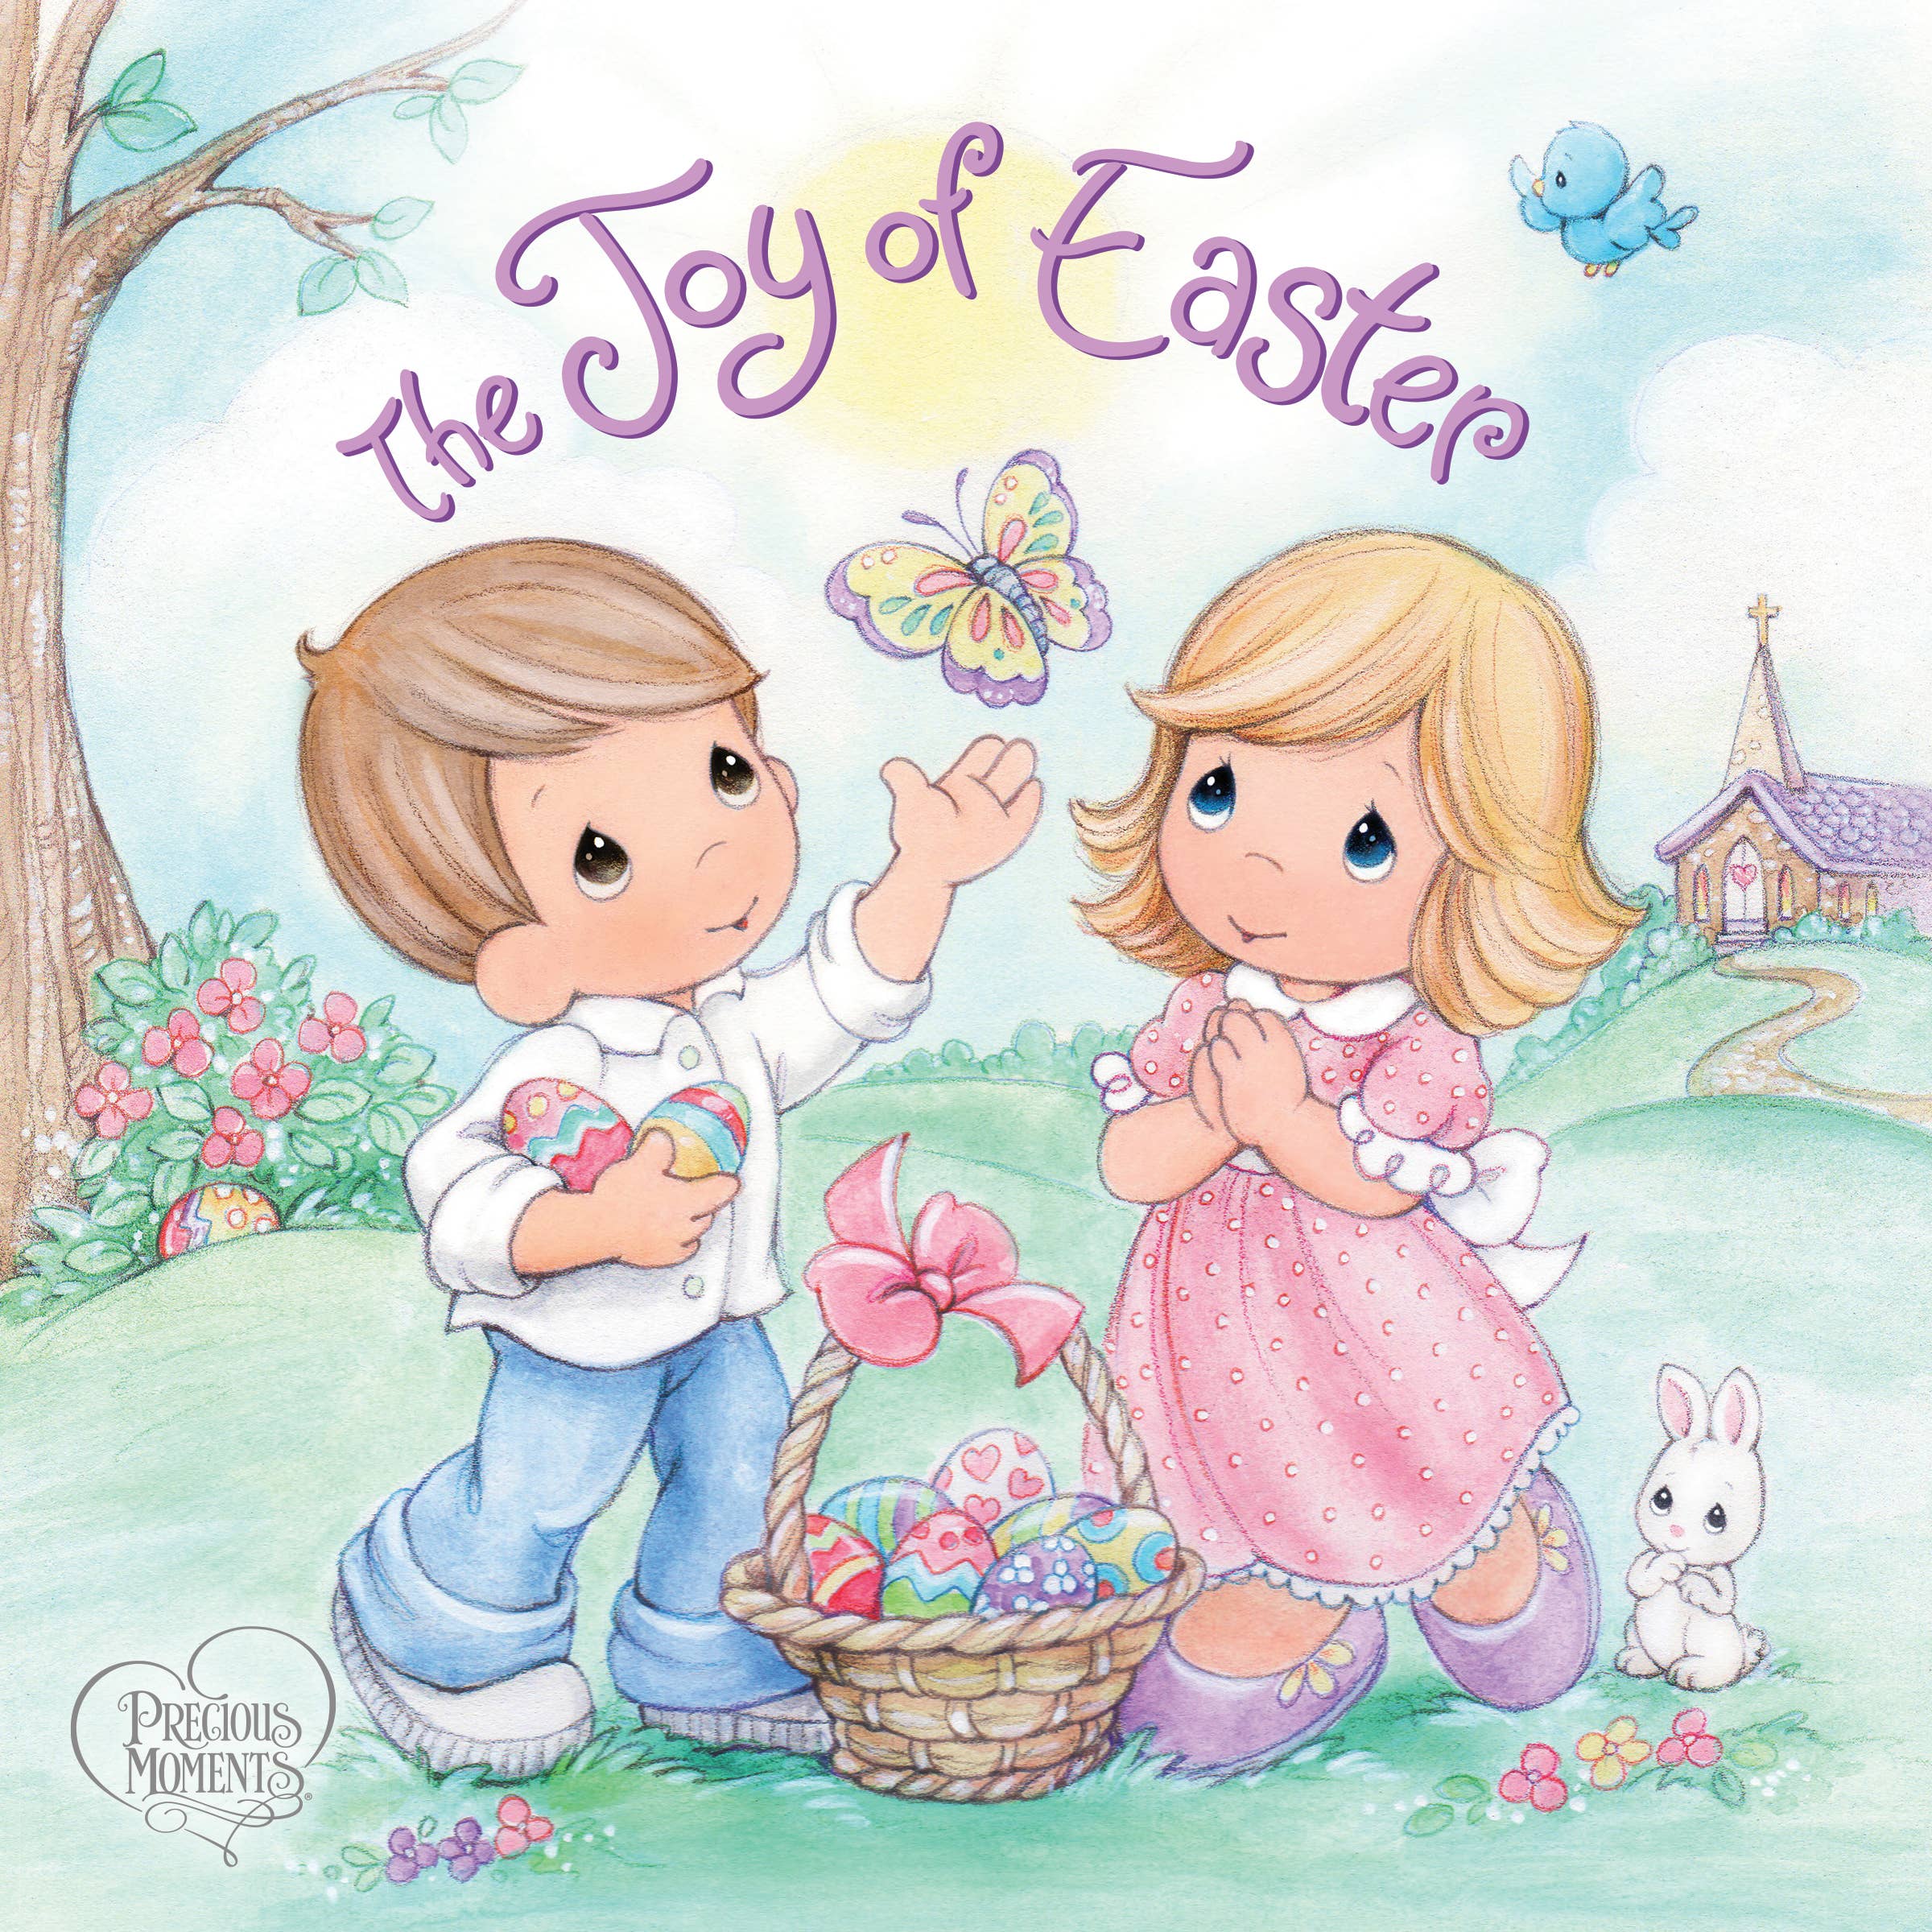 Joy of Easter (Precious Moments) - Hardcover Picture Book - Clearance